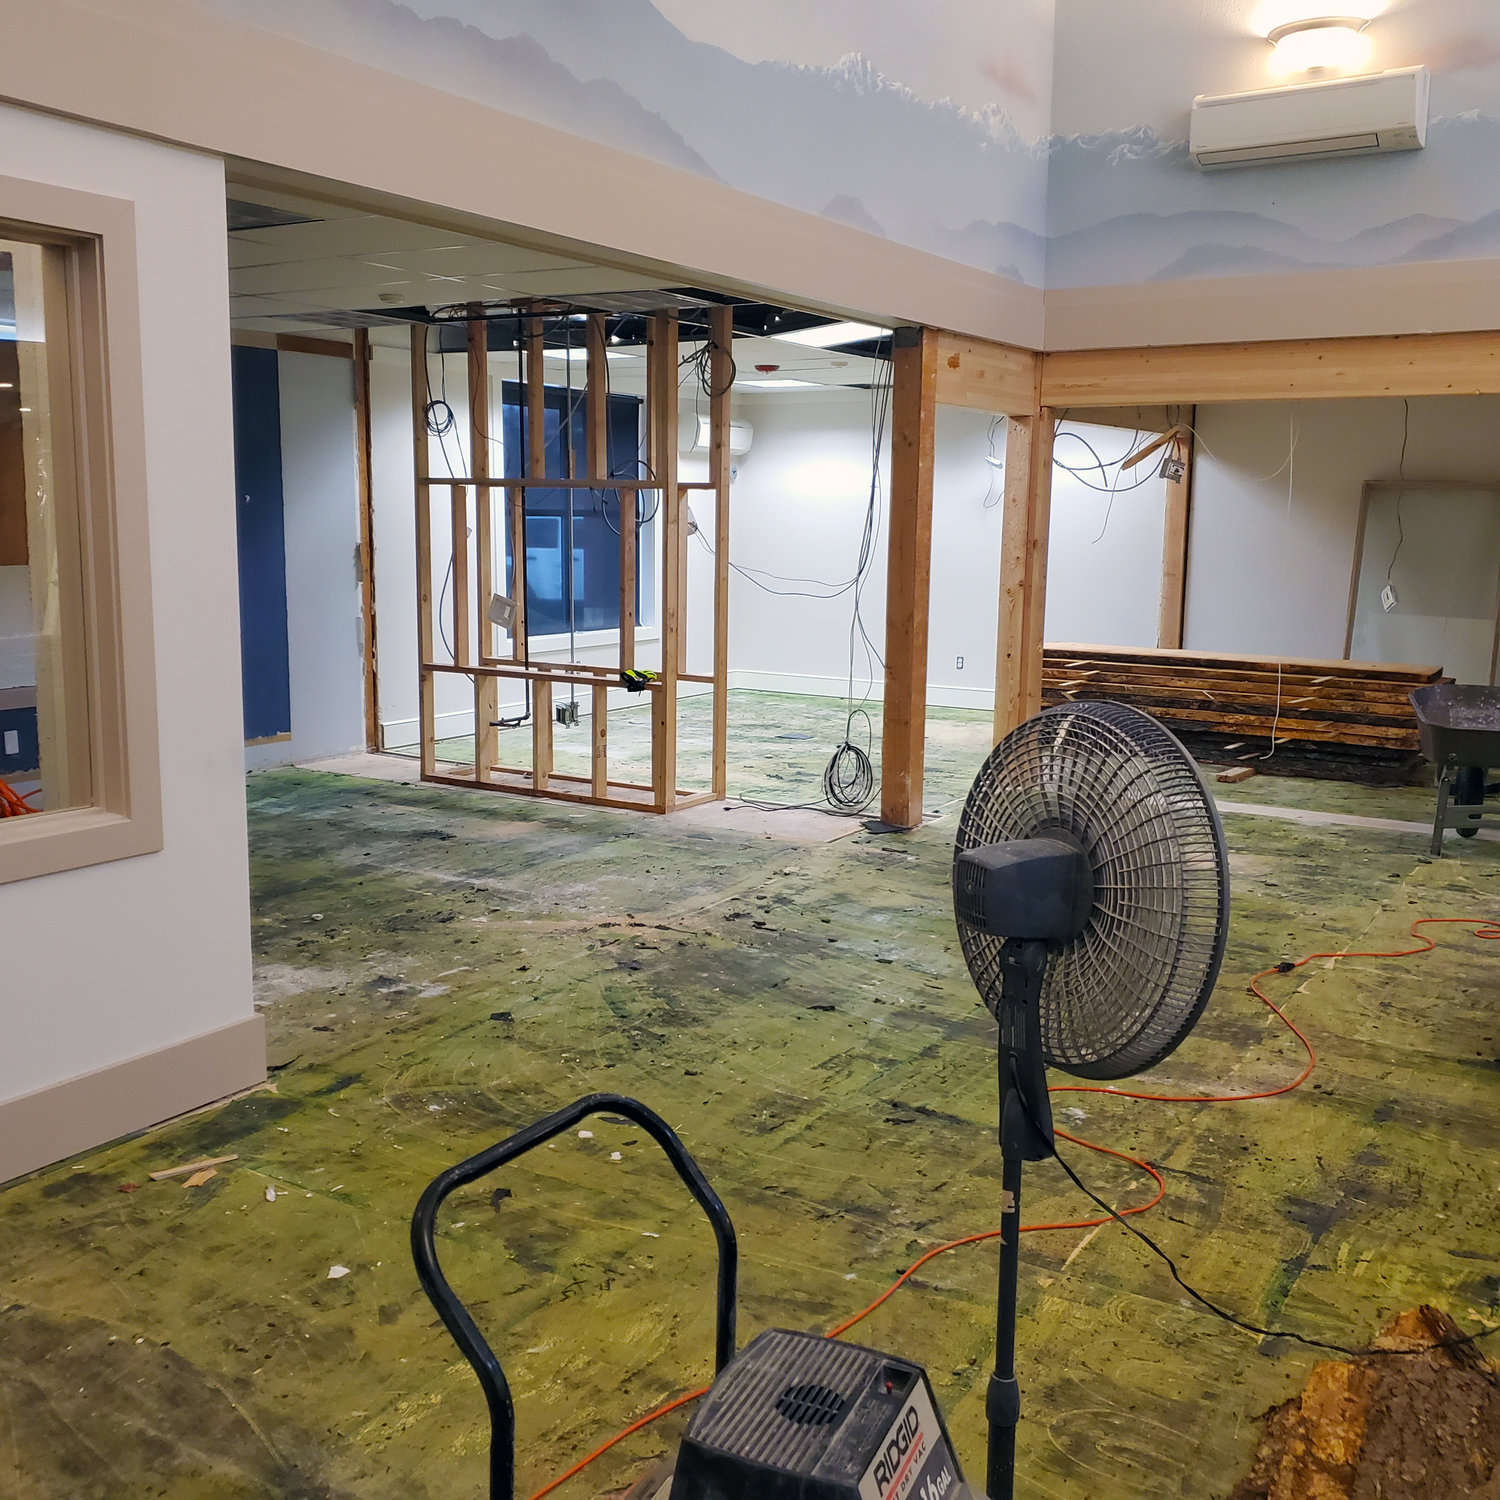 Work continues on 507 Taproom and Filling Station's expansion to a second location at the old bank building at 608 Yelm Ave. E.